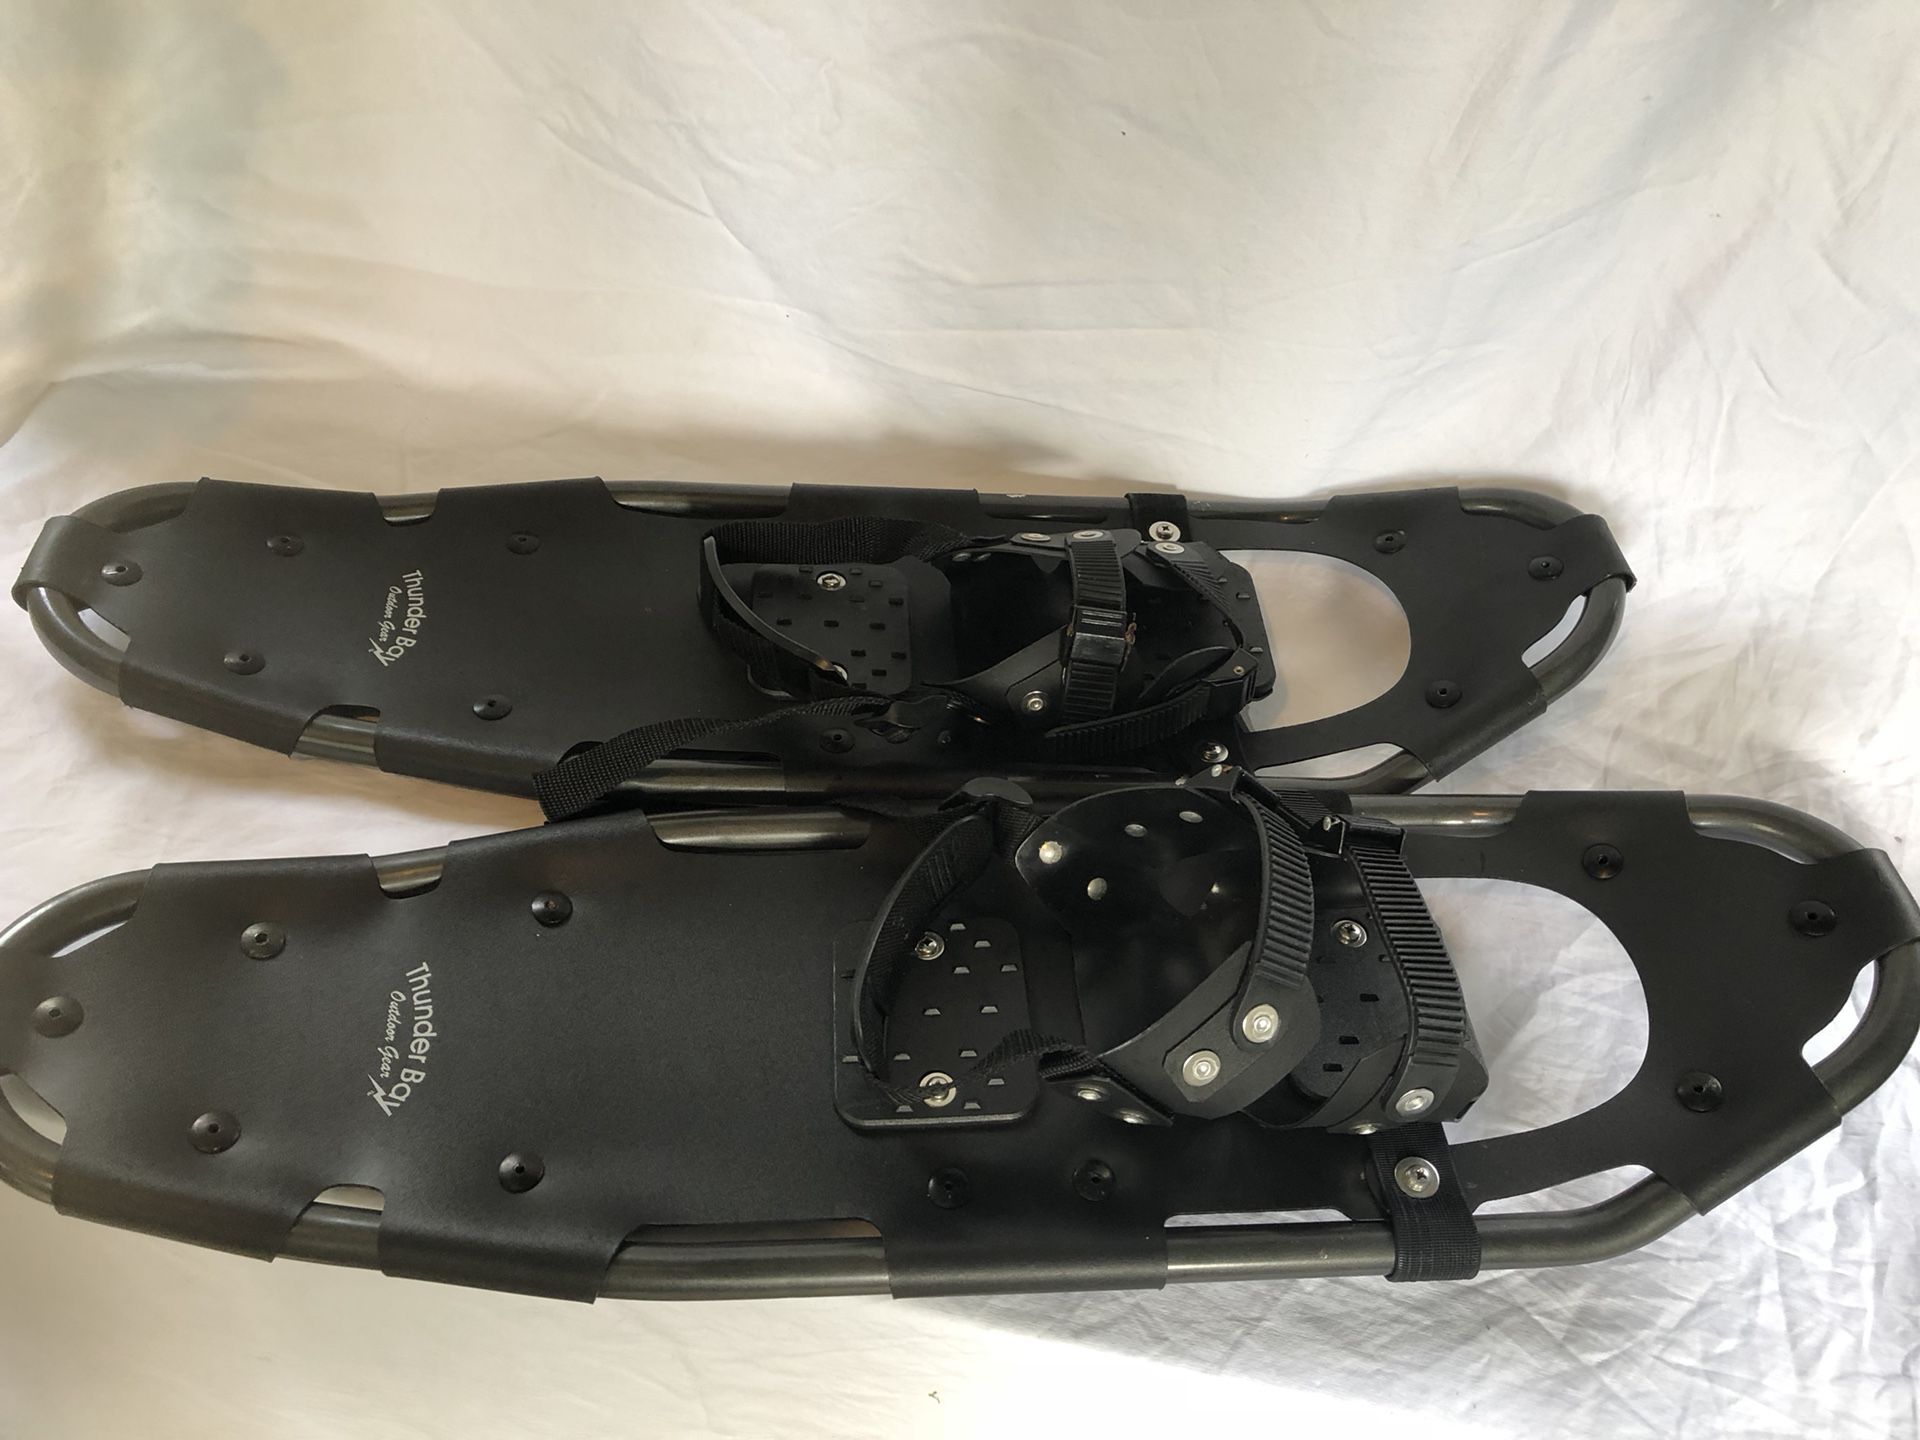 2 Thunder Bay 28” 71cm Snow Shoes Black 2 Sets Poles & 2 Carrying Case Bags Used